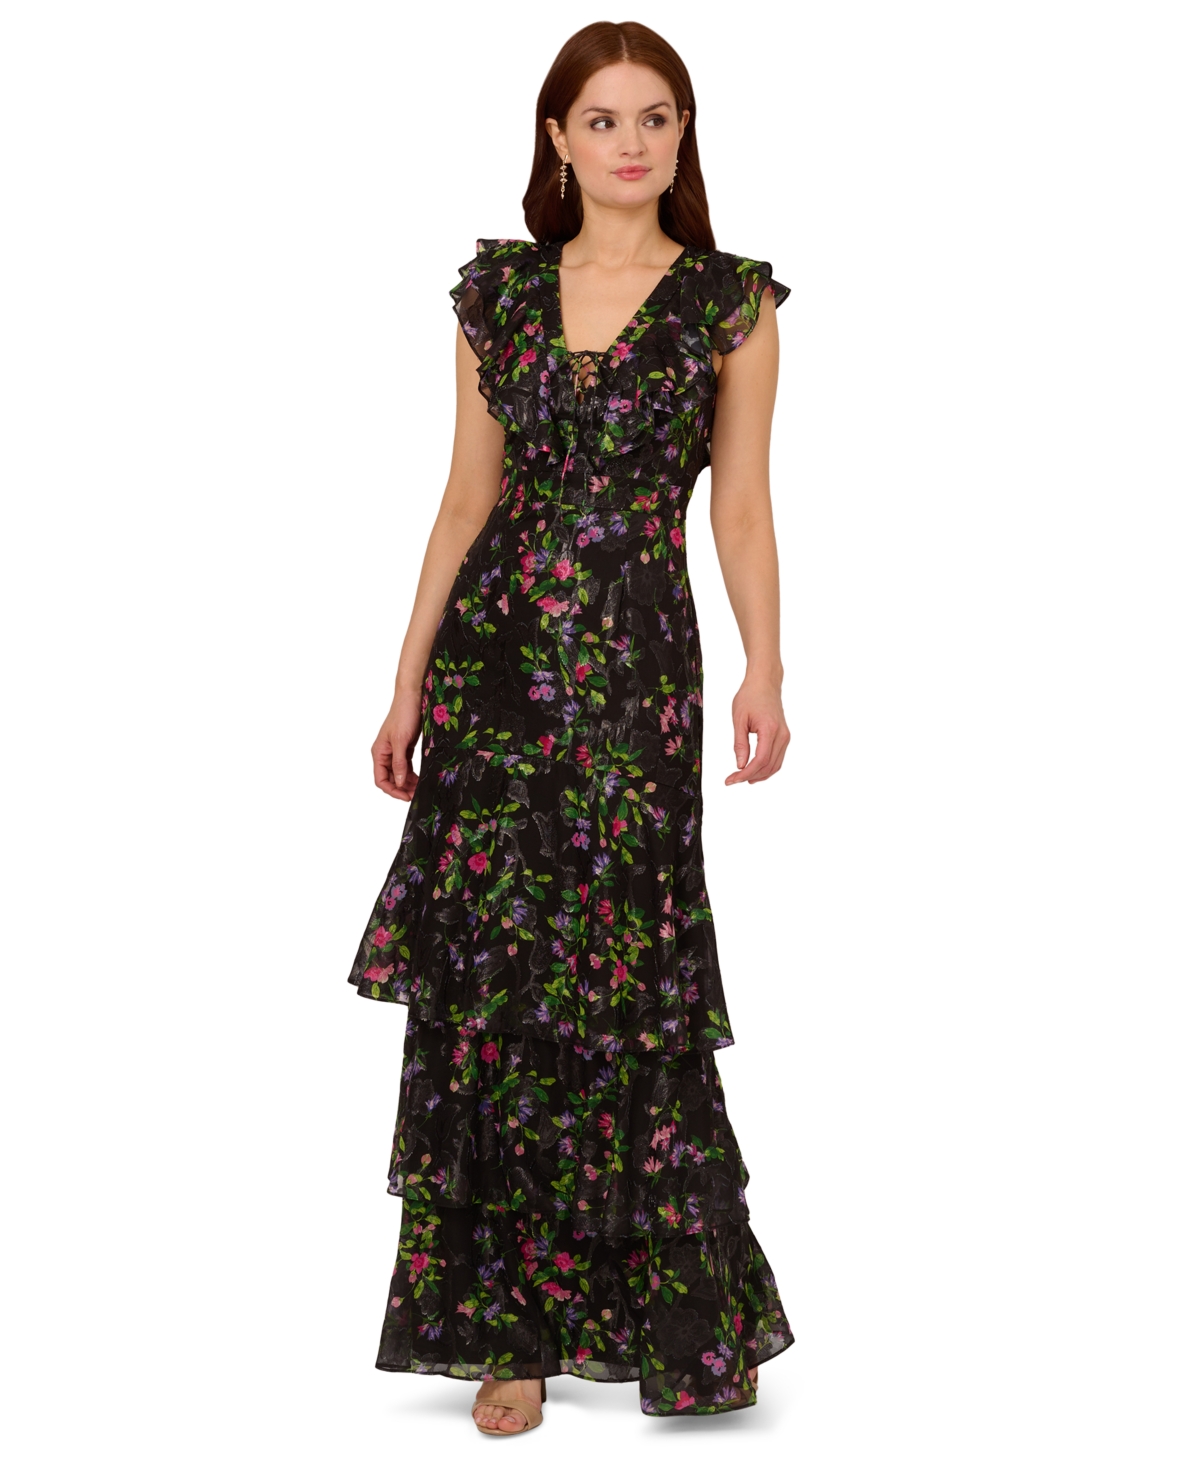 Women's Printed Flutter-Sleeve Tiered Gown - Black Multi